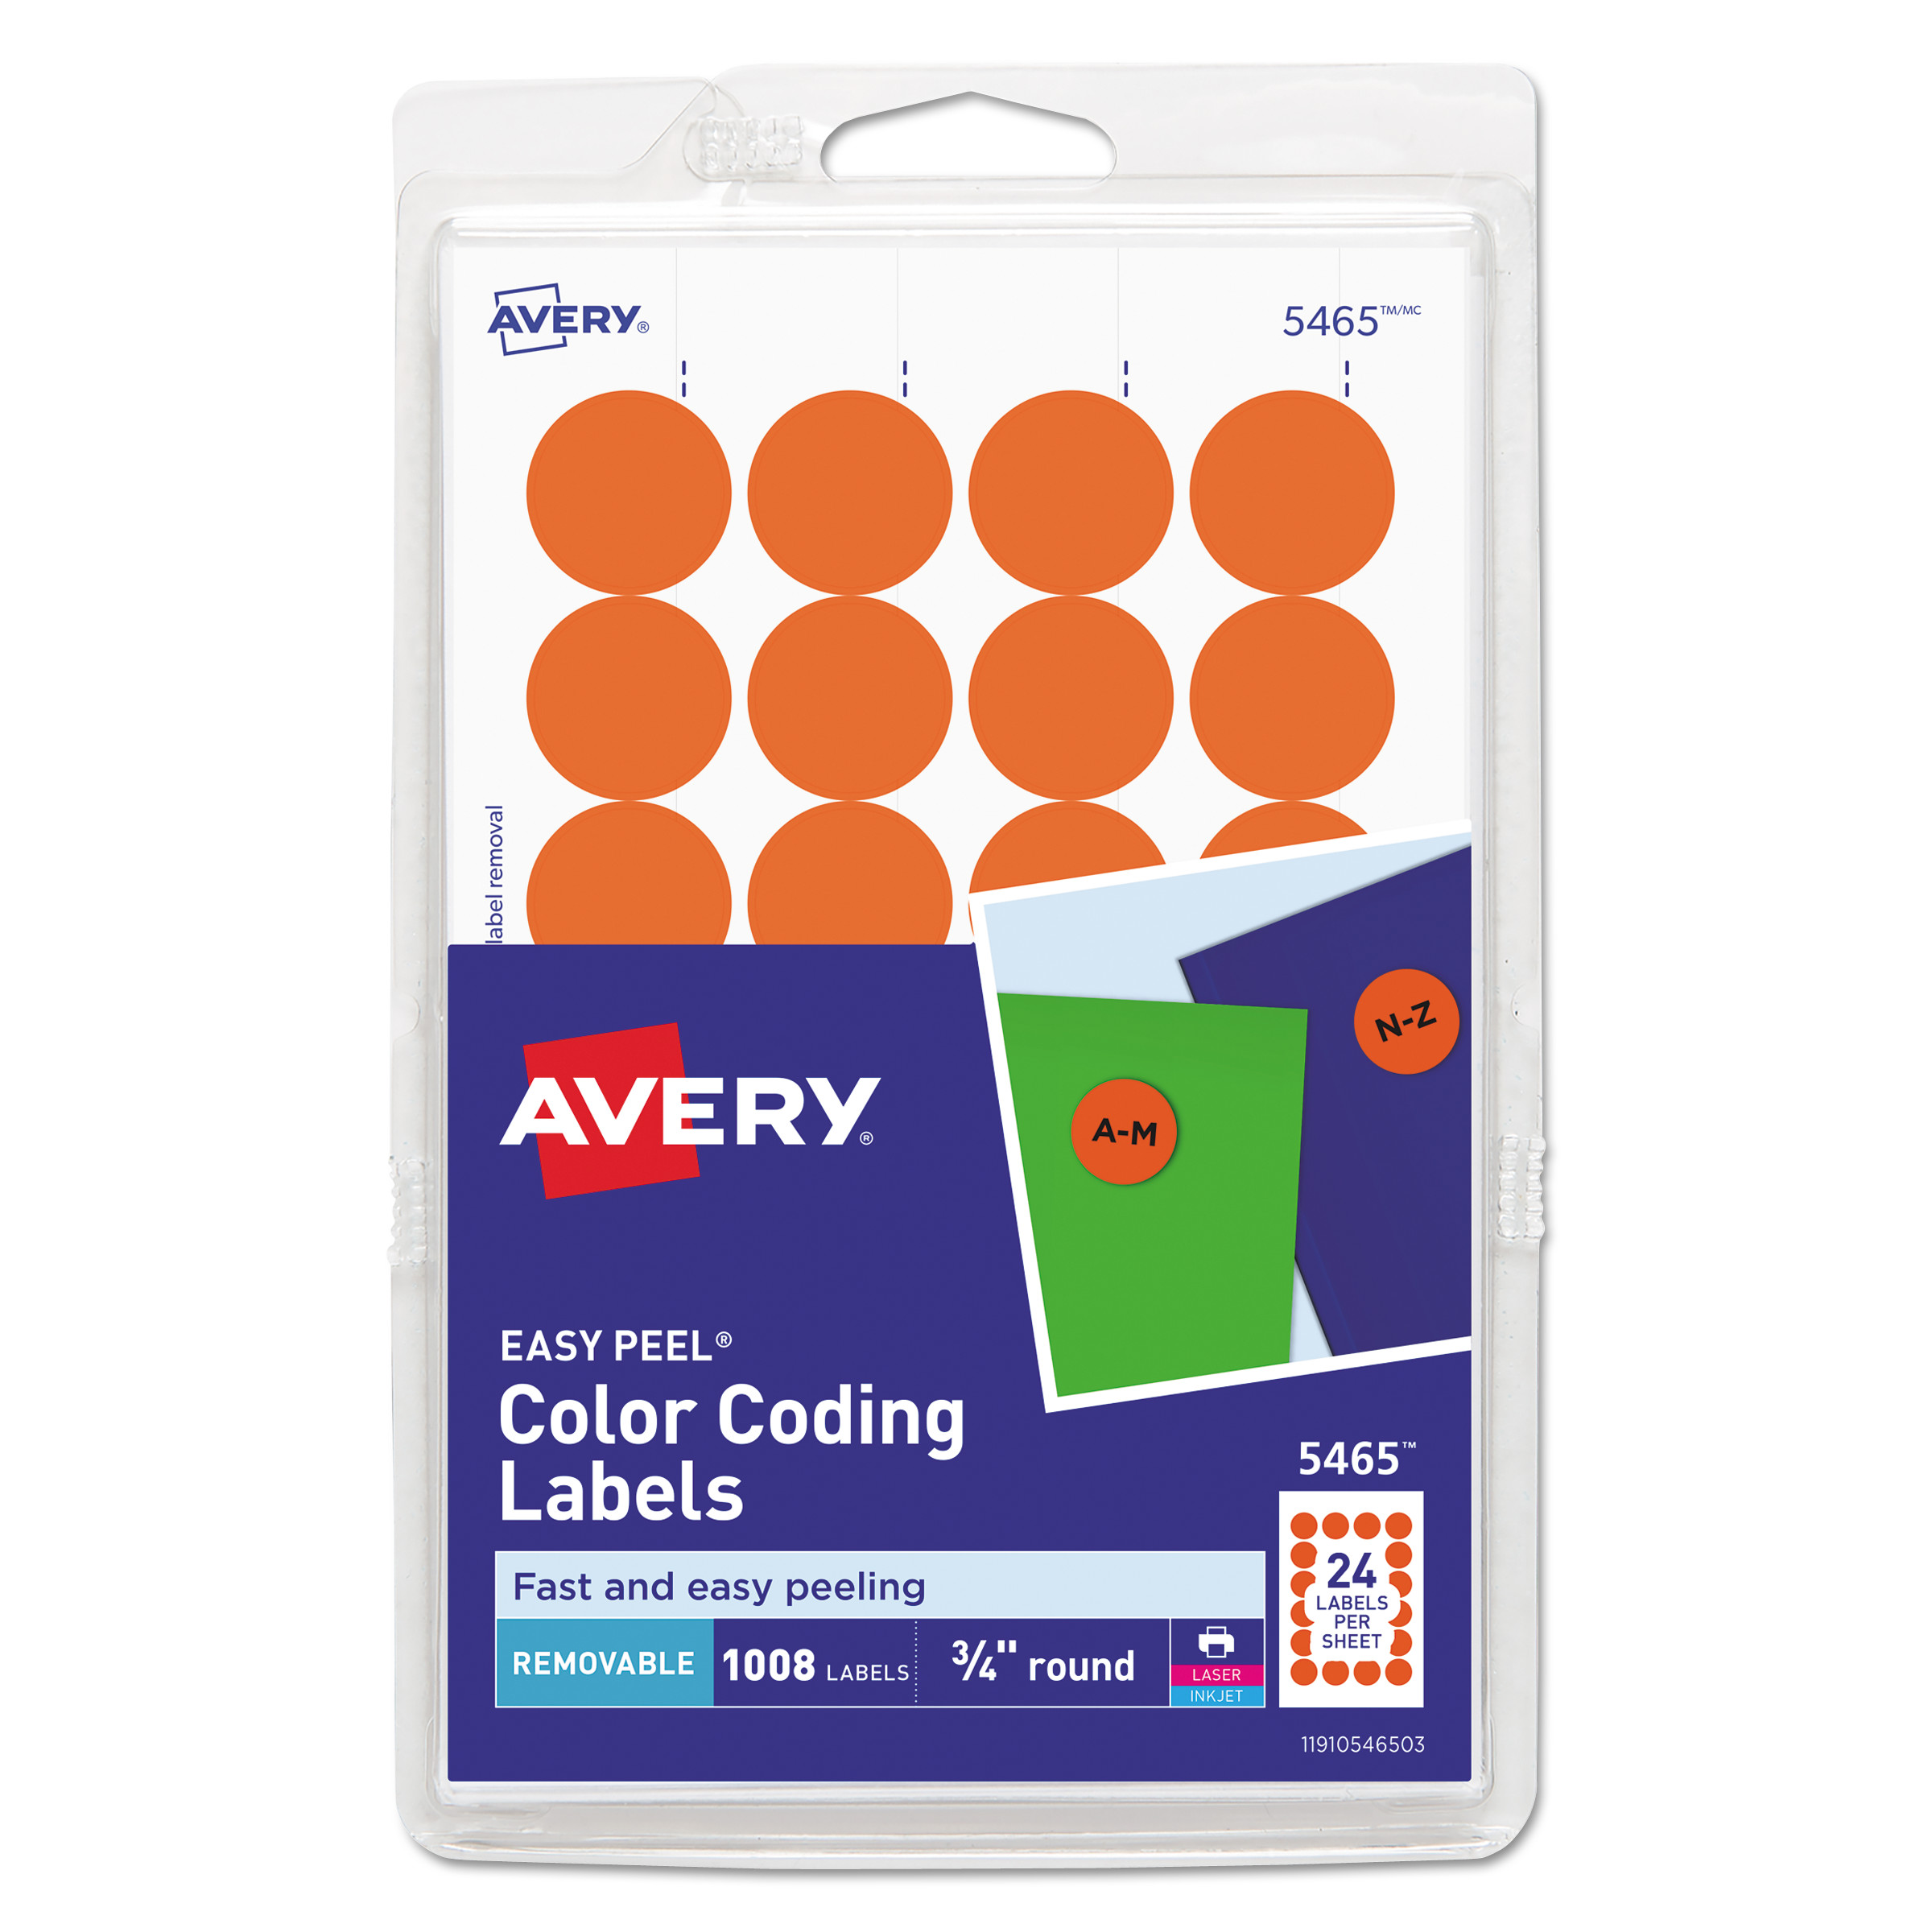  Avery 05465 Printable Self-Adhesive Removable Color-Coding Labels, 0.75 dia., Orange, 24/Sheet, 42 Sheets/Pack (AVE05465) 